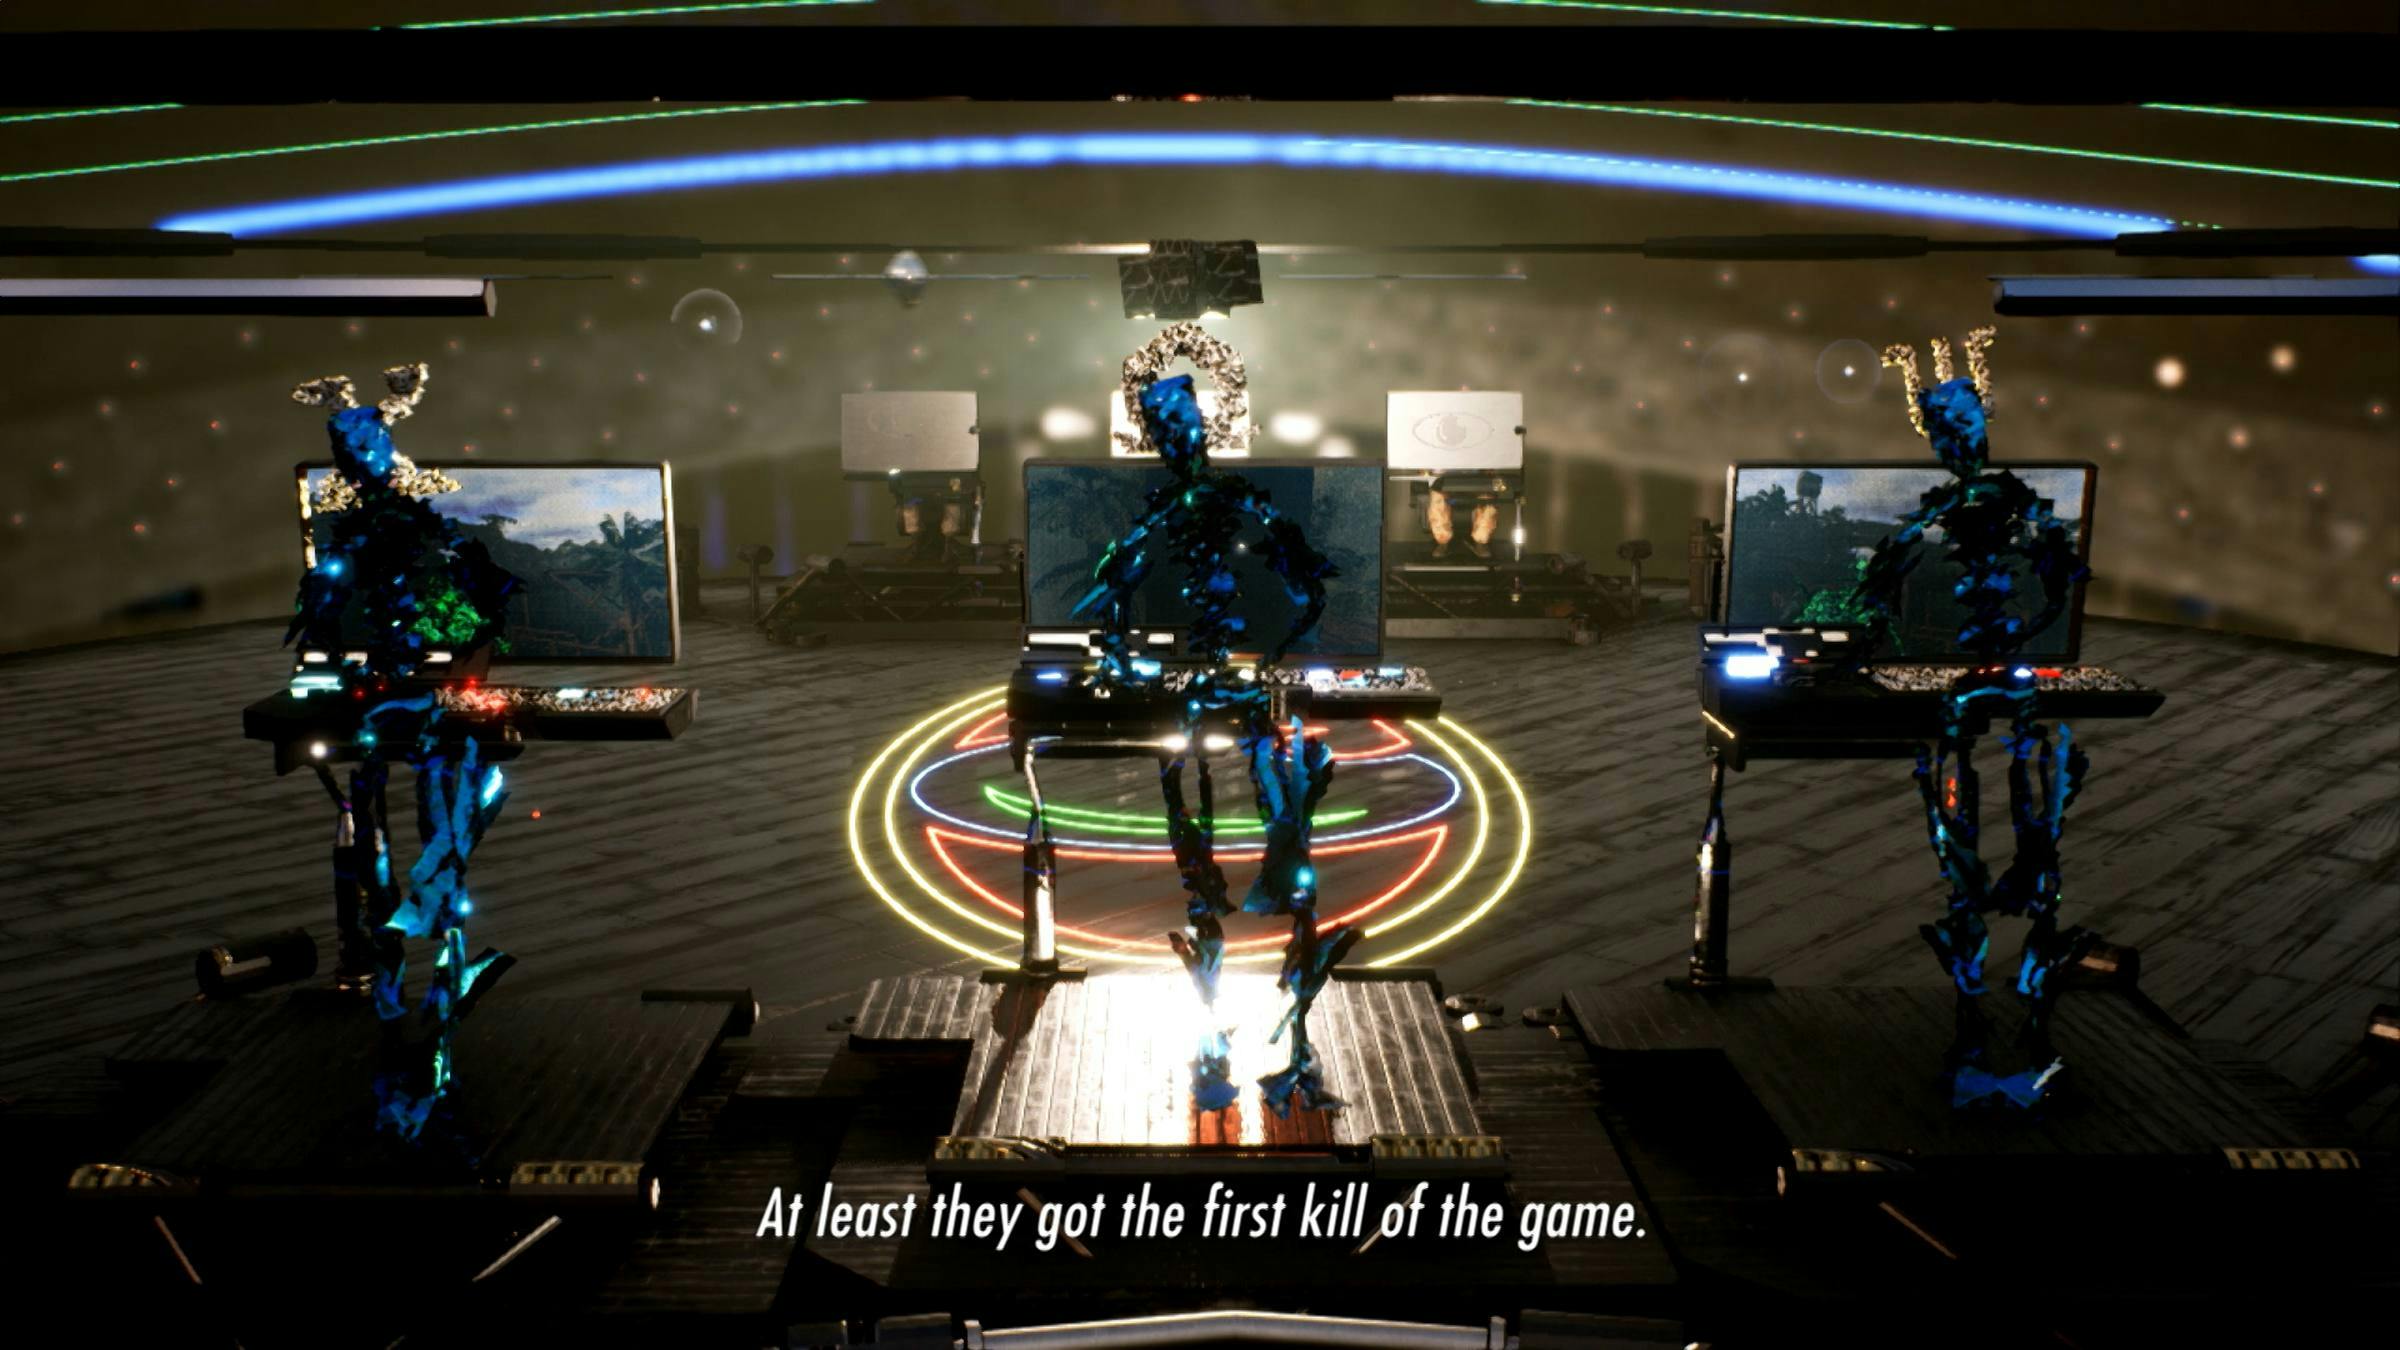 Three robotic figures sit in a futuristic looking space, lit by different colored lights. The words ' At least they got the first kill of the game' are superimposed on top.